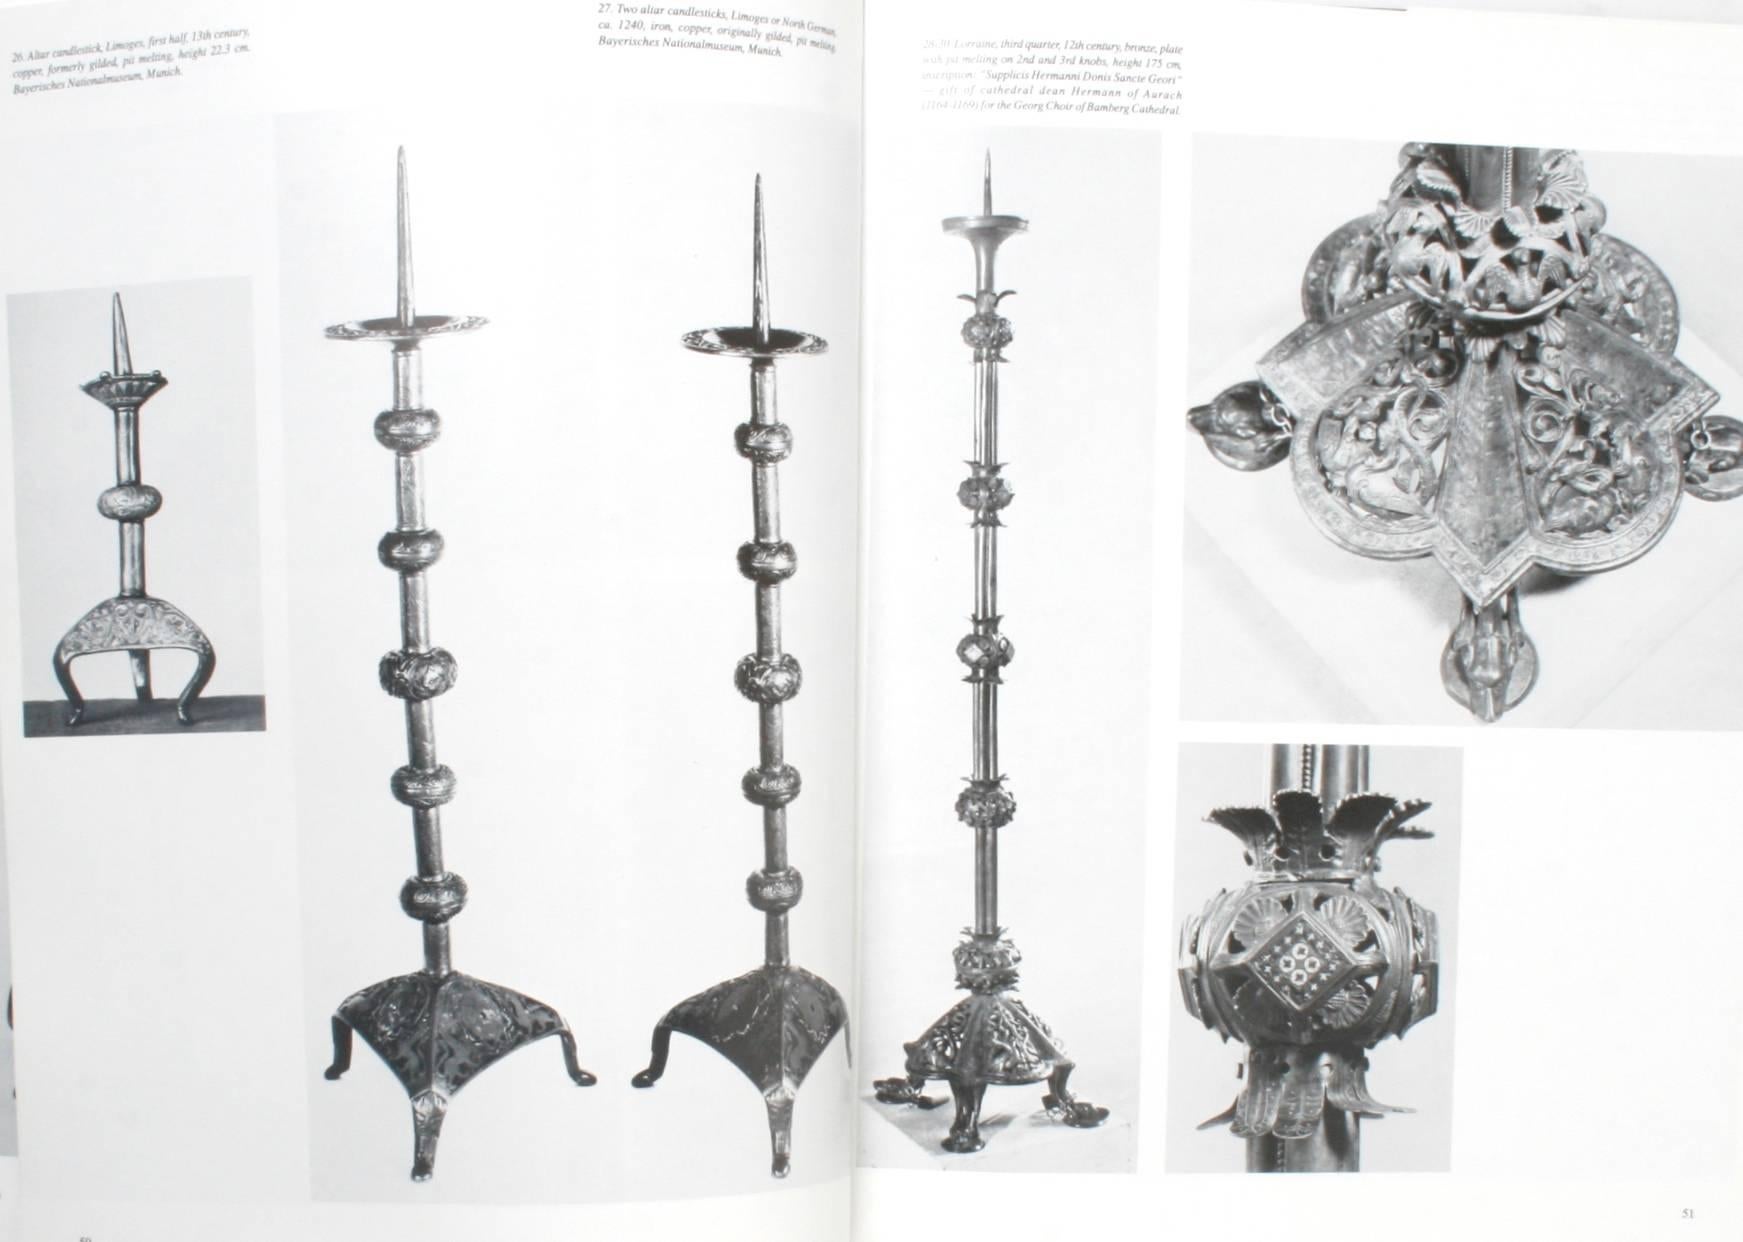 Metal Candlesticks, History, Styles and Techniques by Veronica Baur. Atglen: Schiffer Publishing Ltd., 1996. 1st Ed thus hardcover with dust jacket. 184 pp. A guide of the development of the metal candlestick, characteristic styles, and changing